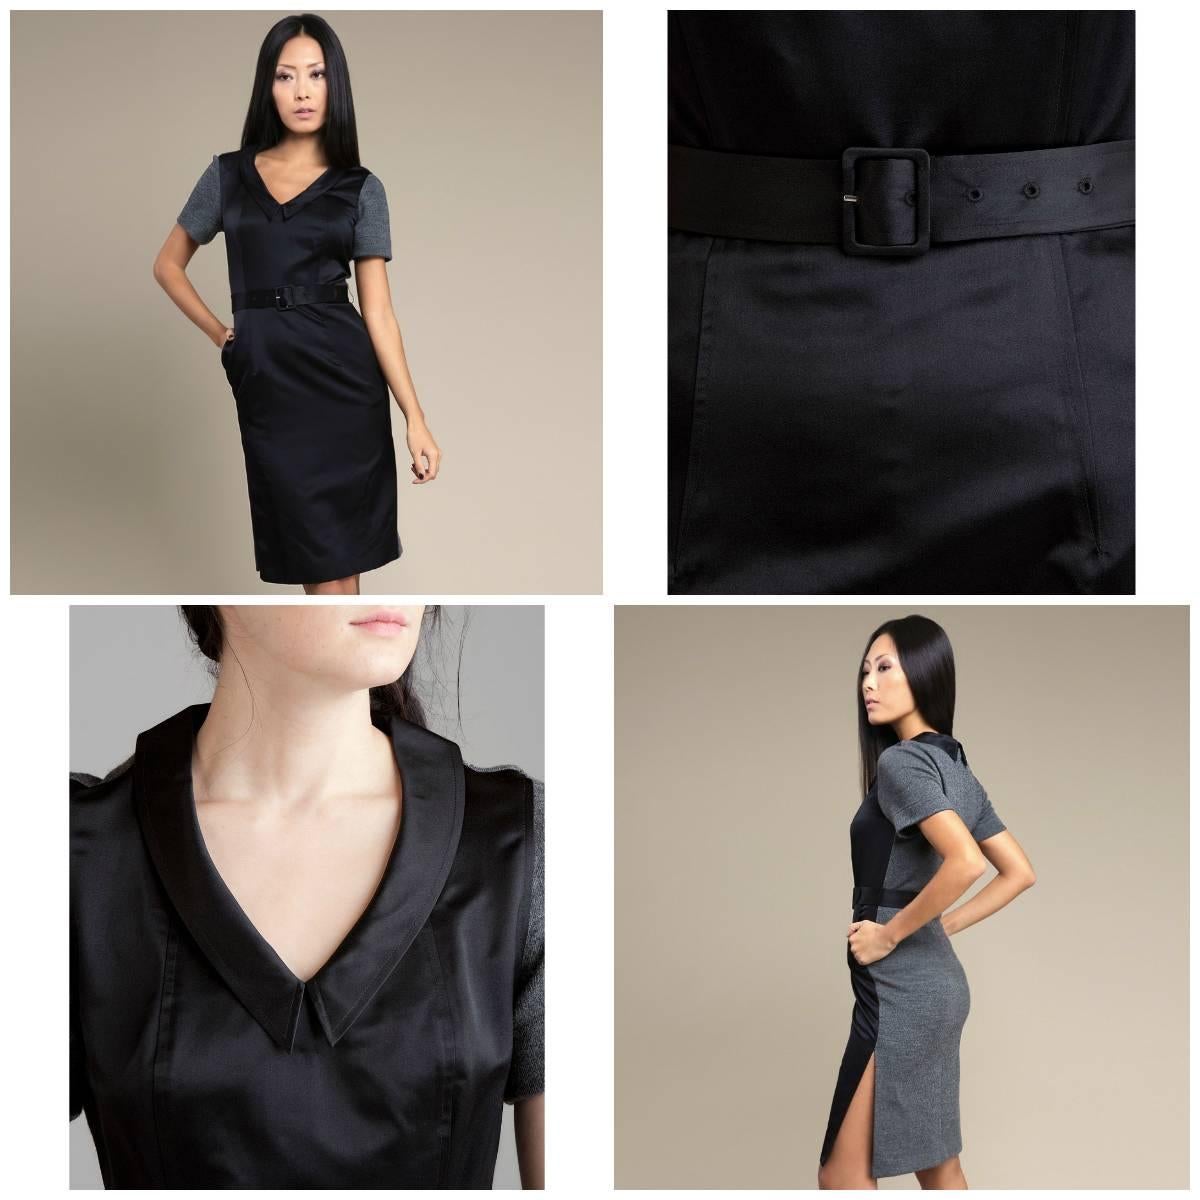 Vera Wang Lavender Label
Brand New with Tags
Shell 1 (Front) 60% Silk/40% Rayon
Shell 2 (Back) 100% Wool
Grey Wool Back 
Adjustable Belt
Two Side Pockets
V-Neck With Pointed Collar
We are happy to provide measurements upon request  